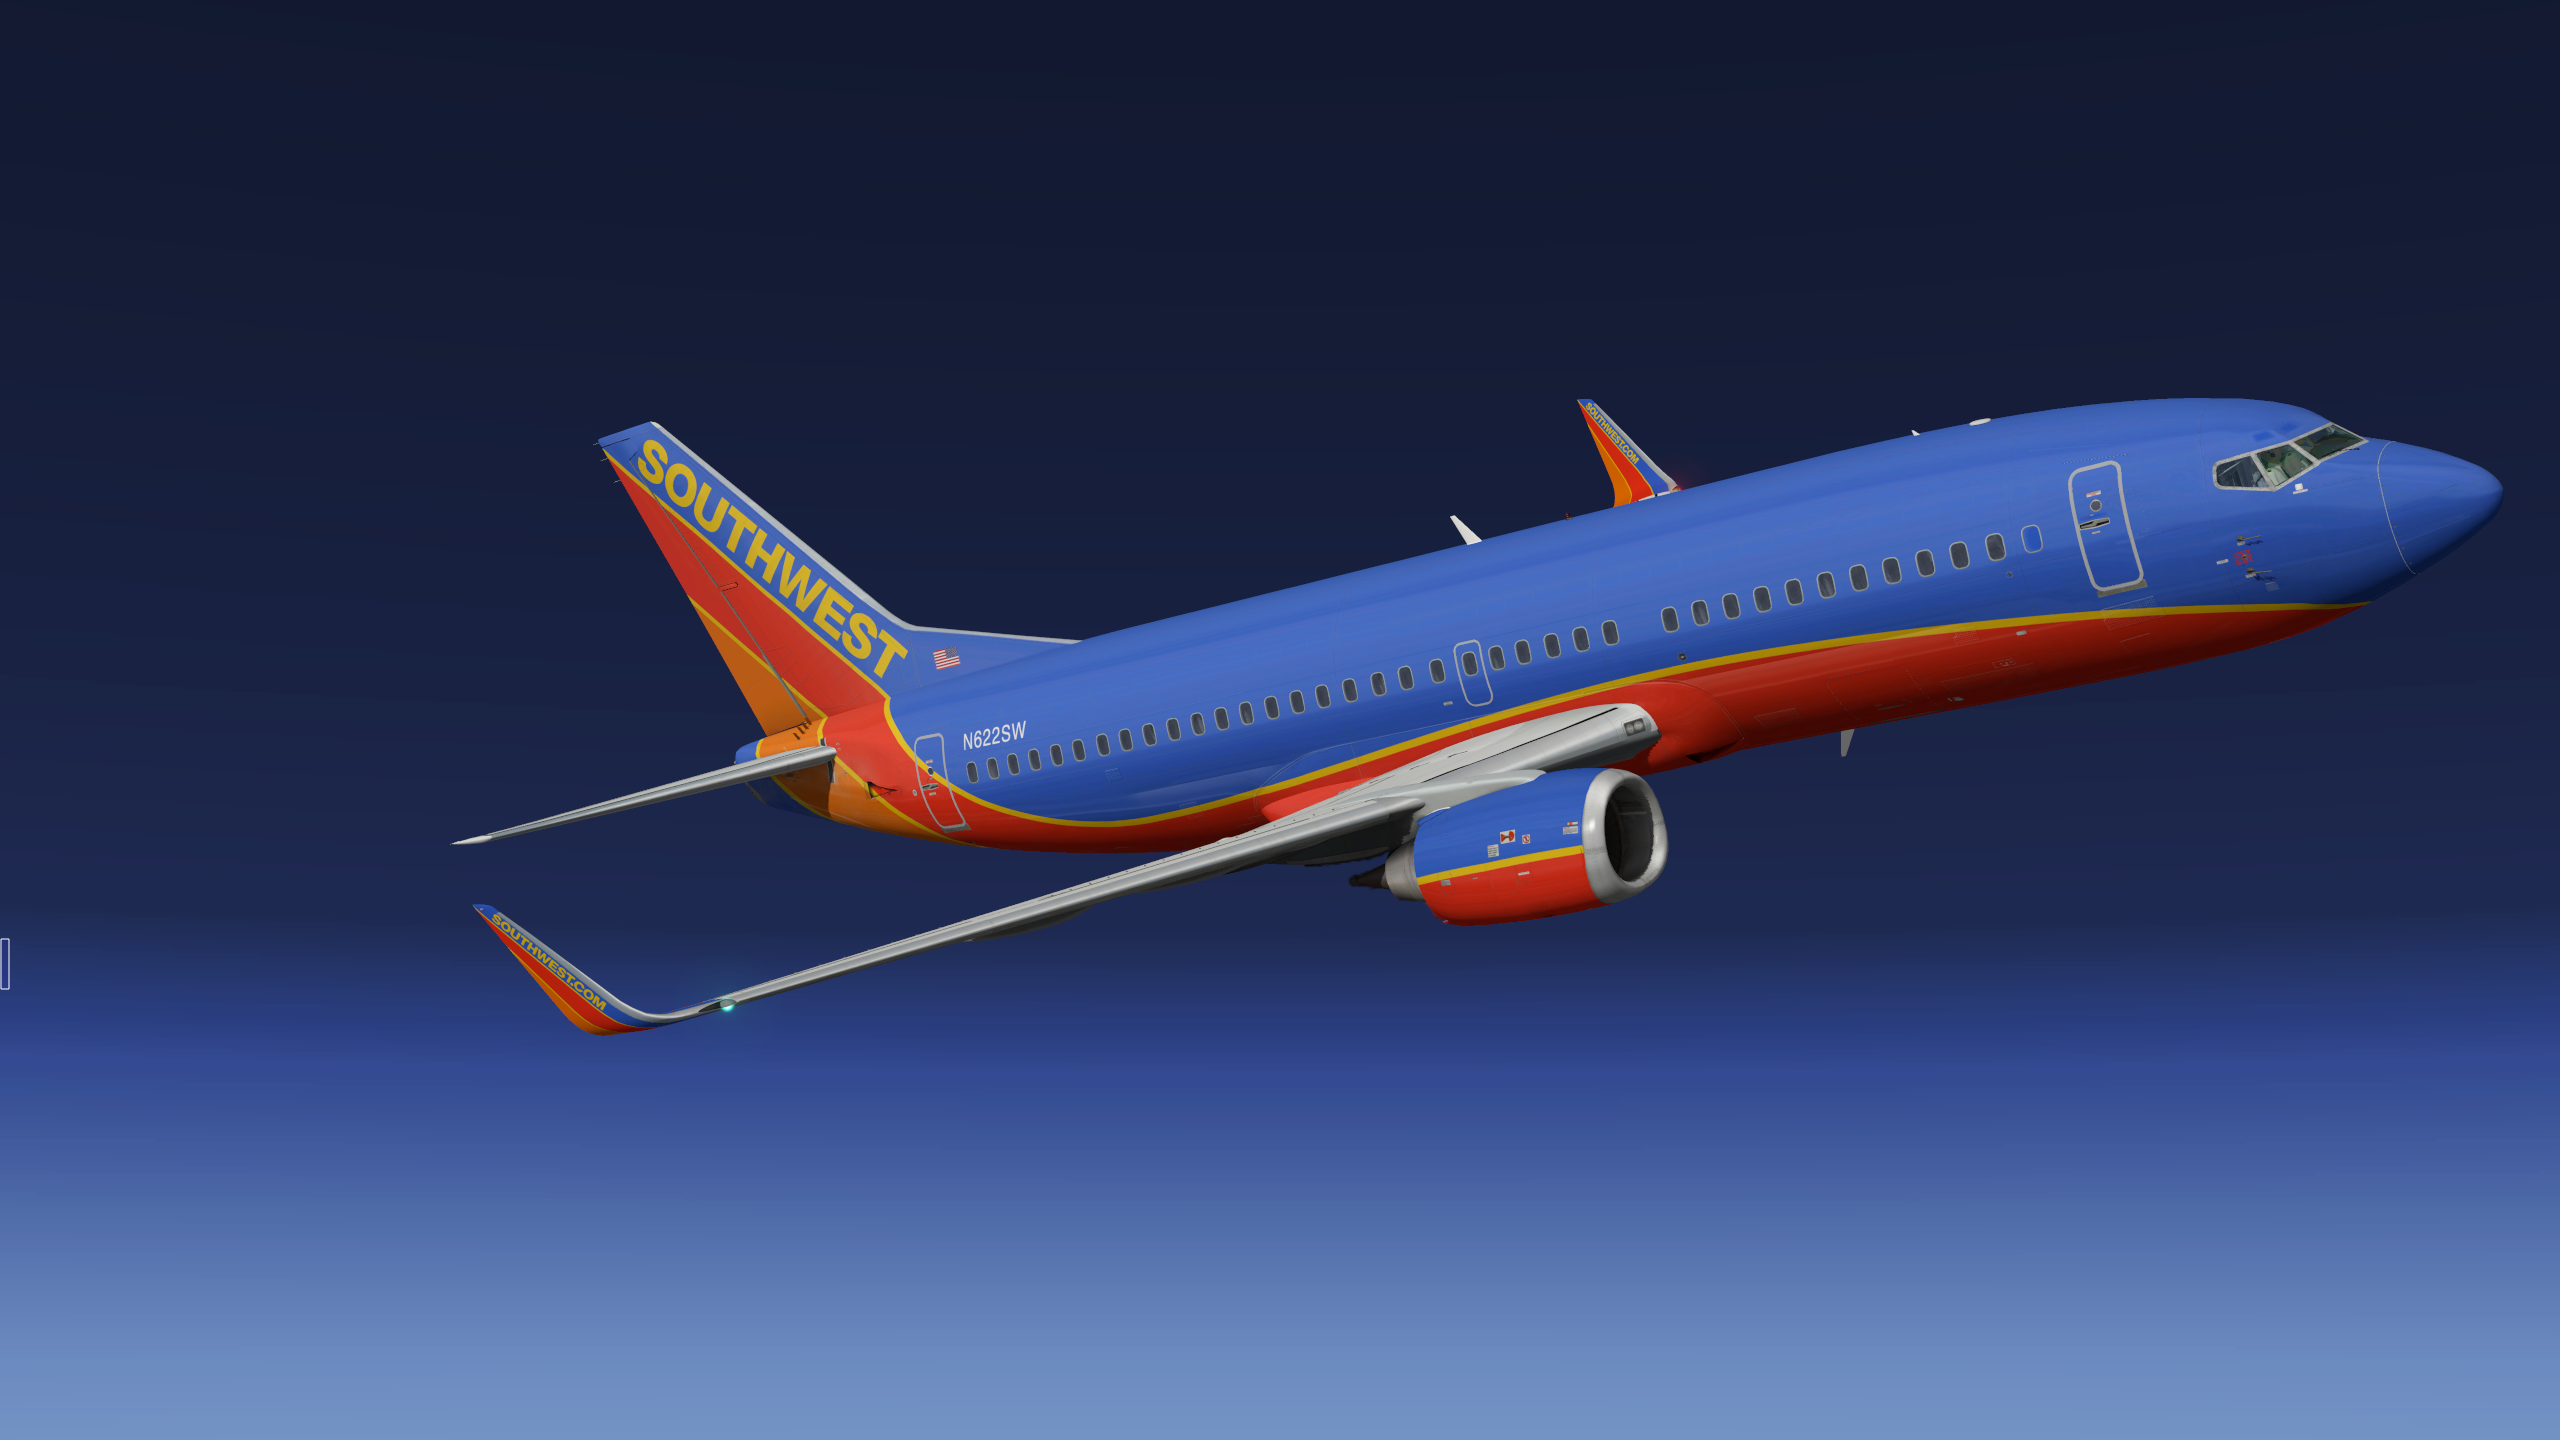 More information about "Southwest Airlines 'Canyon Blue' 737-3H4 N622SW"